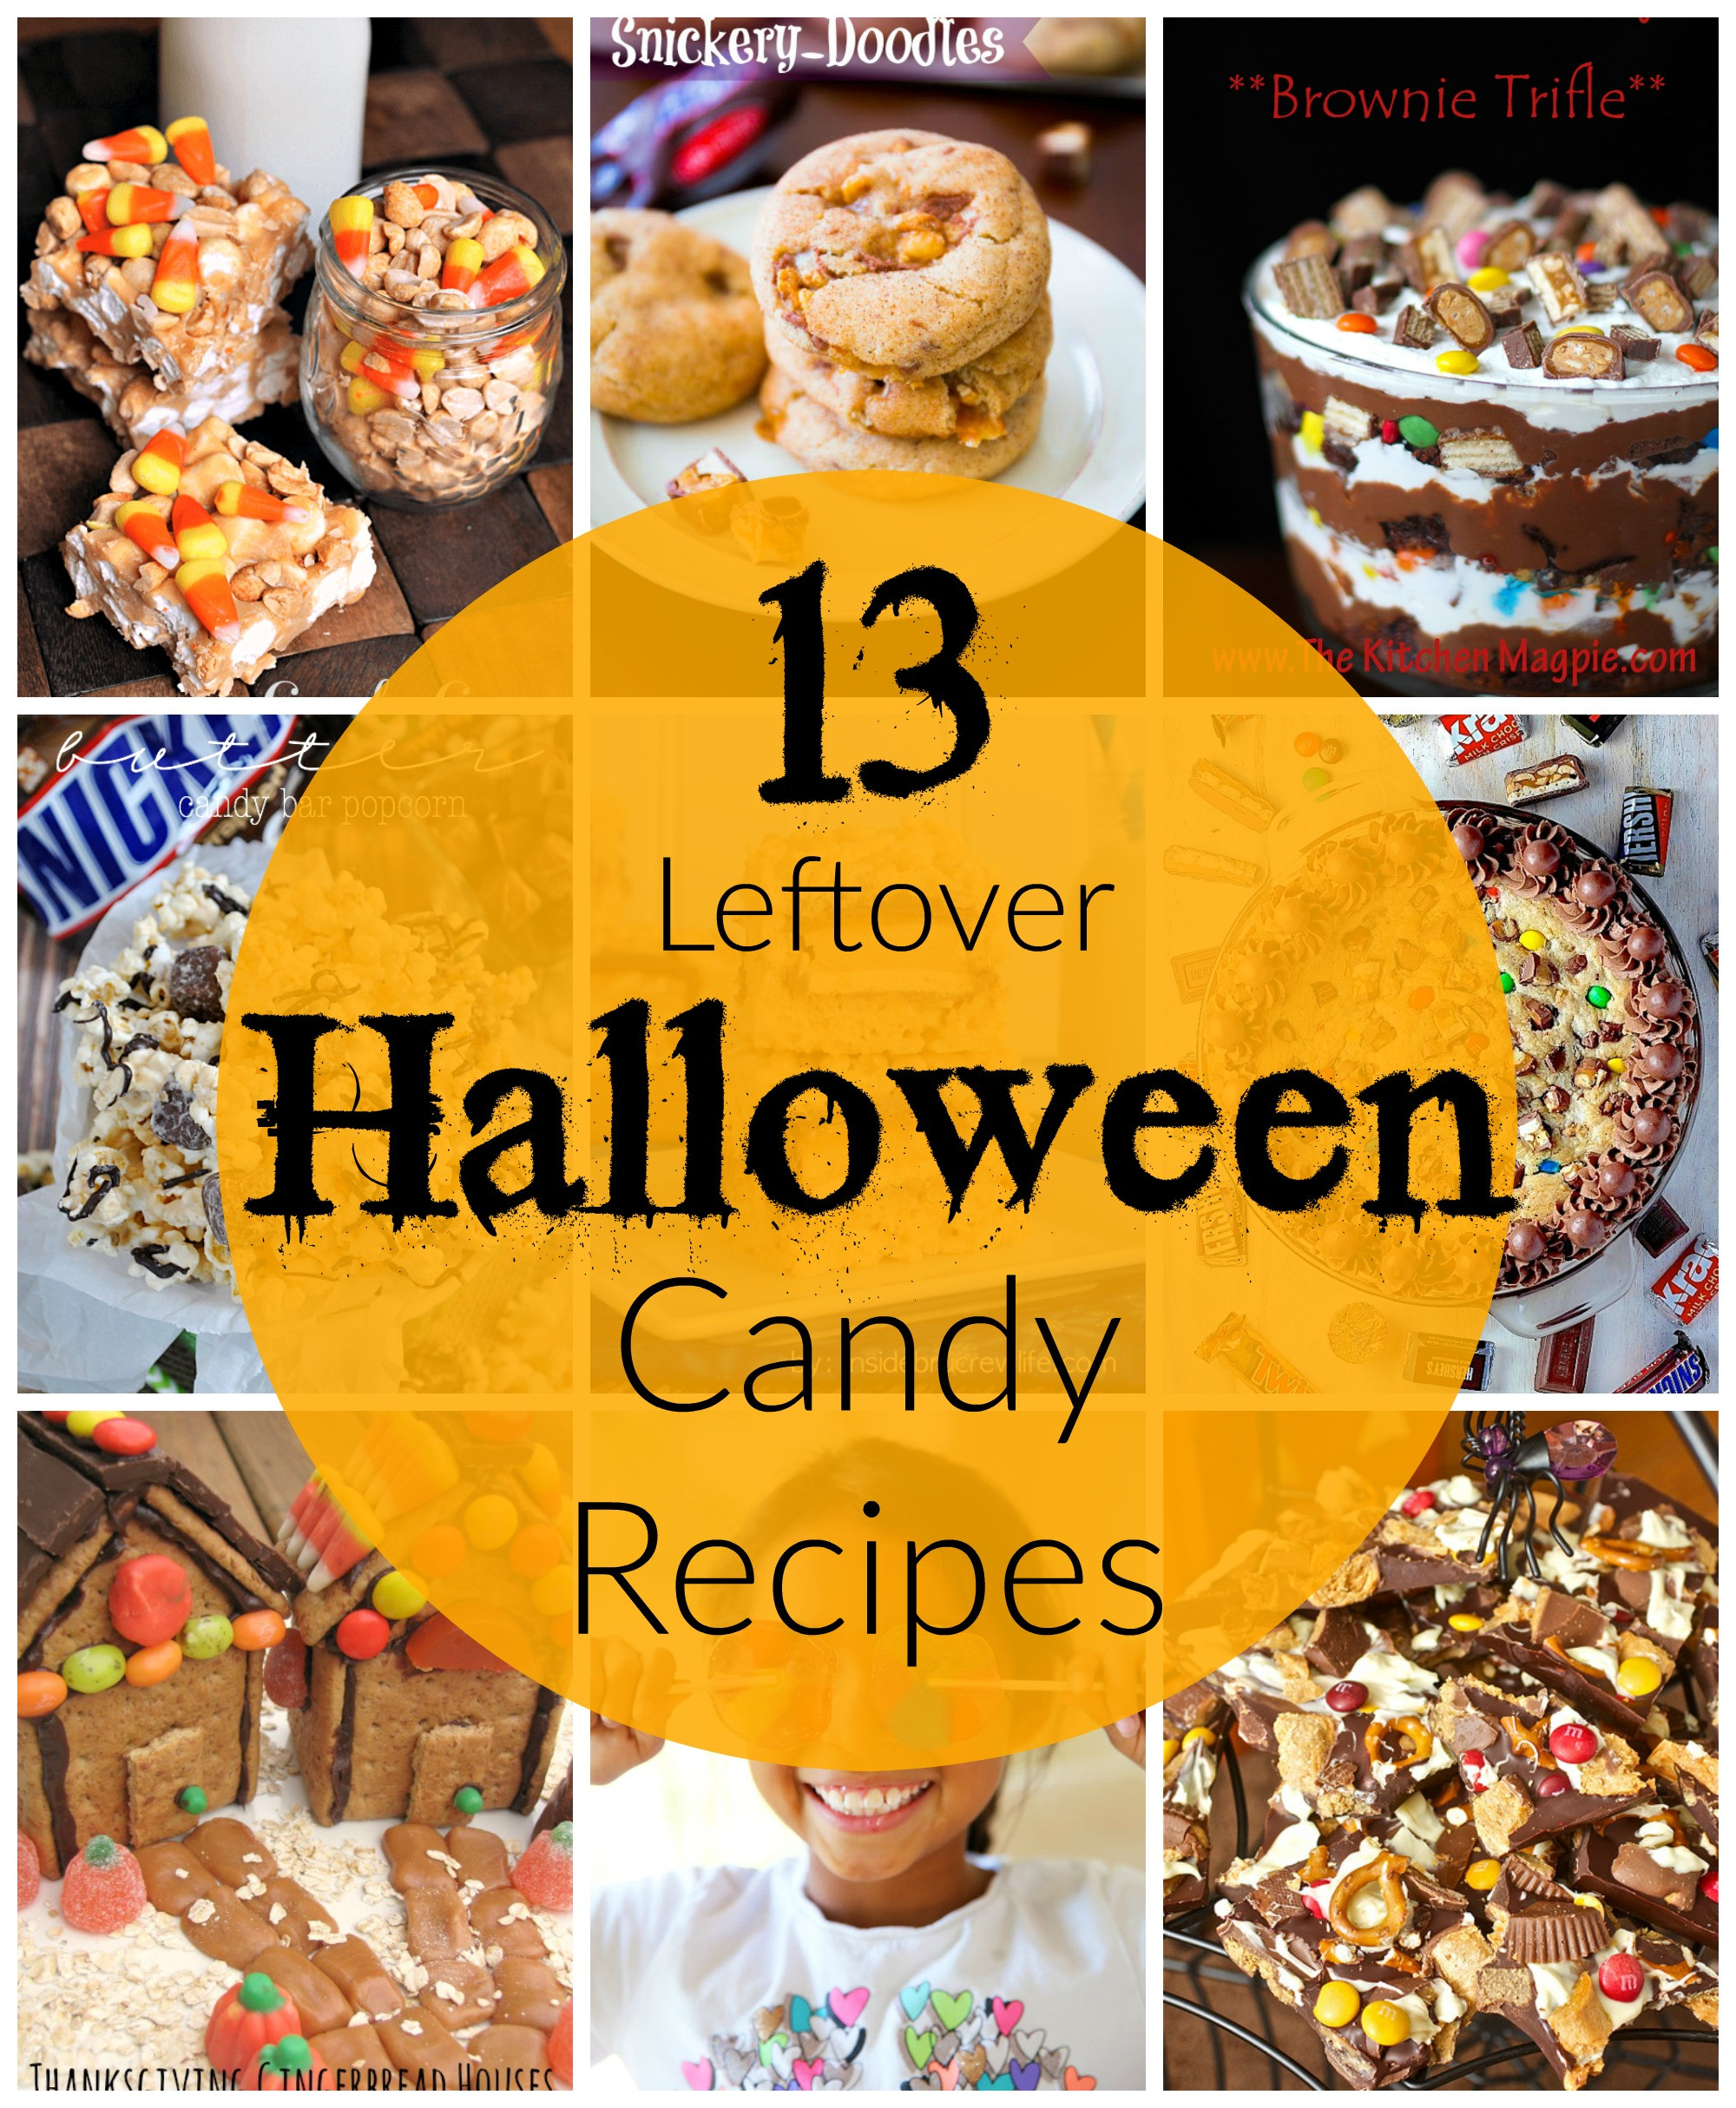 Recipes For Leftover Halloween Candy
 13 Leftover Halloween Candy Recipes